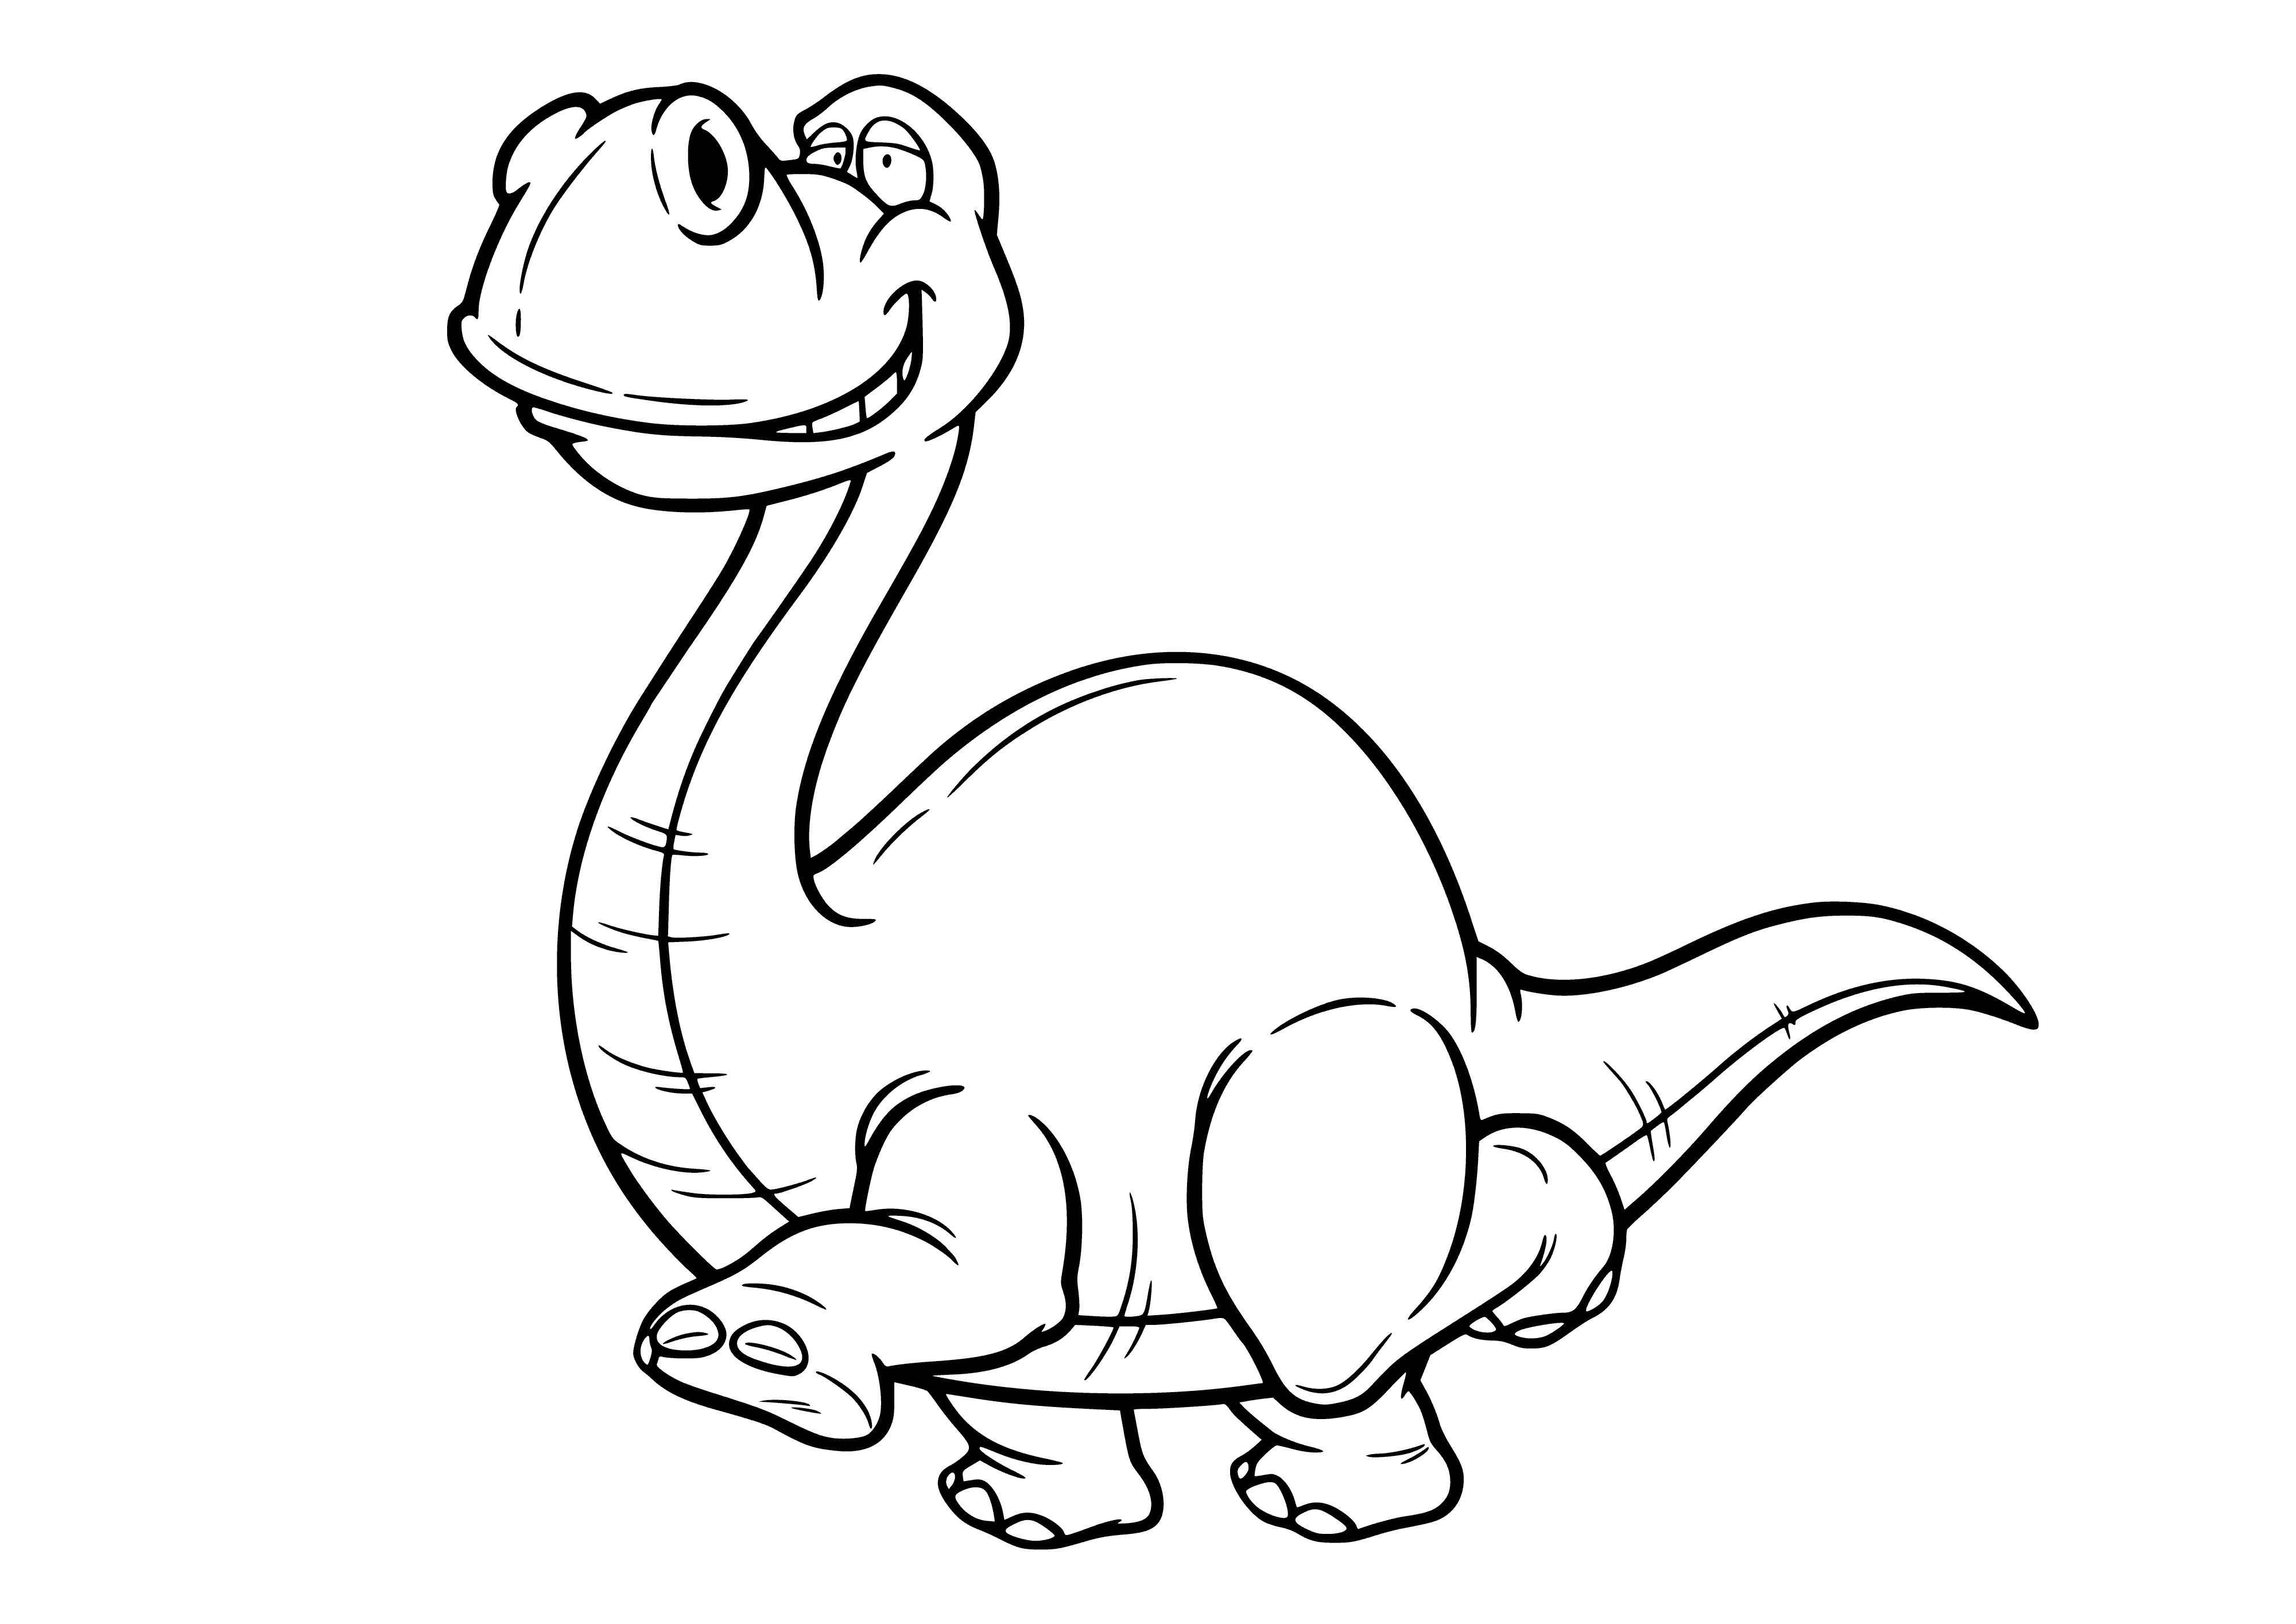 coloring page: Apatosaurus: large green dino, long tail, long neck, small head, short stubby legs.